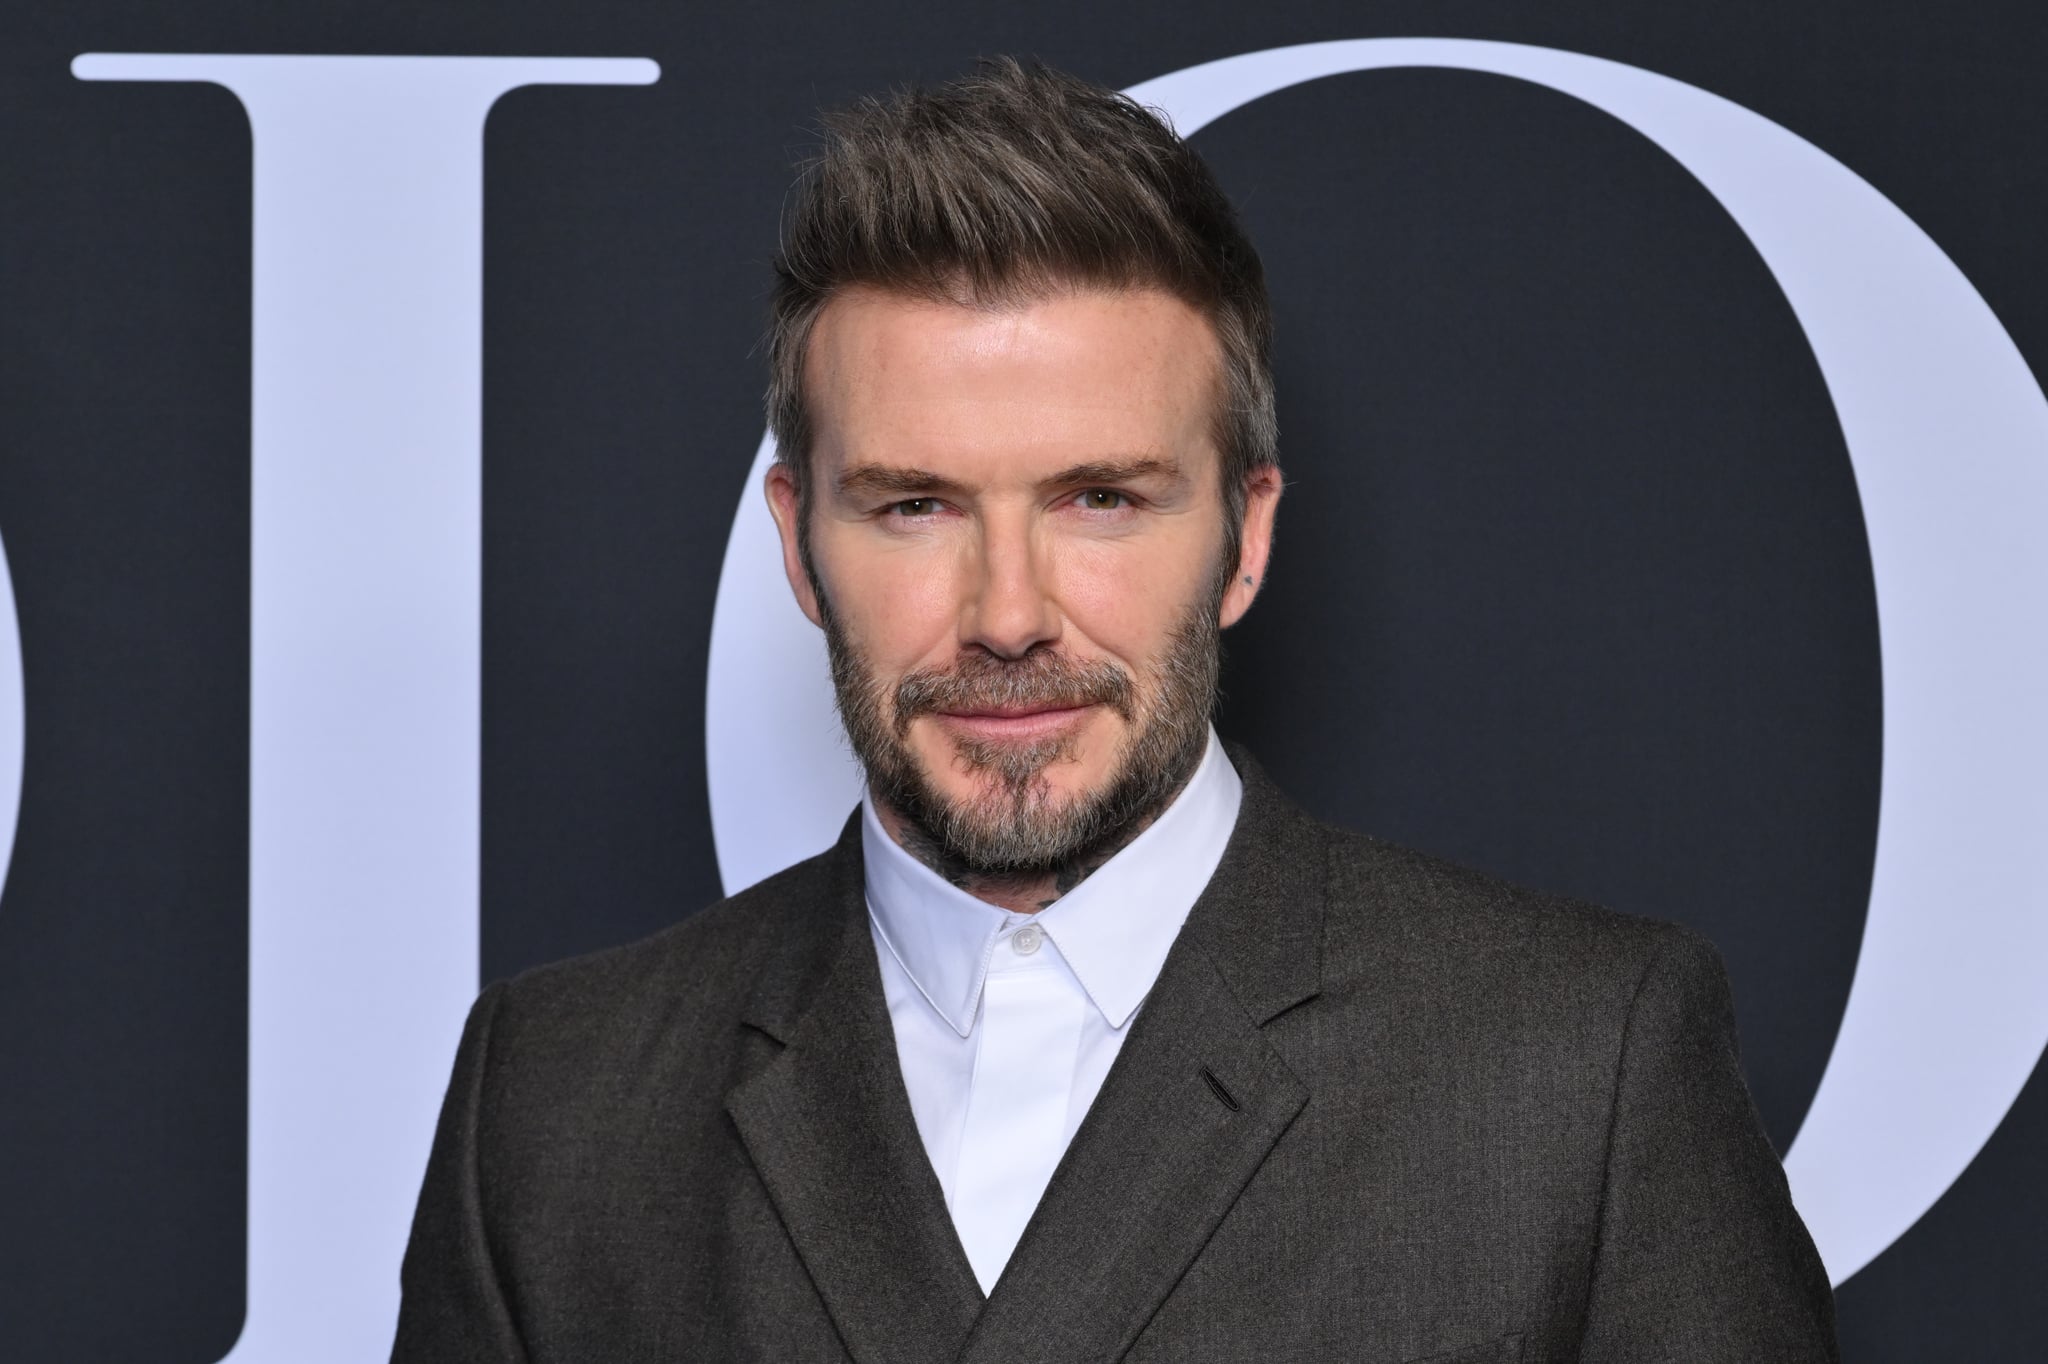 PARIS, FRANCE - JANUARY 20: (EDITORIAL USE ONLY - For Non-Editorial use please seek approval from Fashion House) David Beckham attends the Dior Homme Menswear Fall-Winter 2023-2024 show as part of Paris Fashion Week  on January 20, 2023 in Paris, France. (Photo by Stephane Cardinale - Corbis/Corbis via Getty Images)